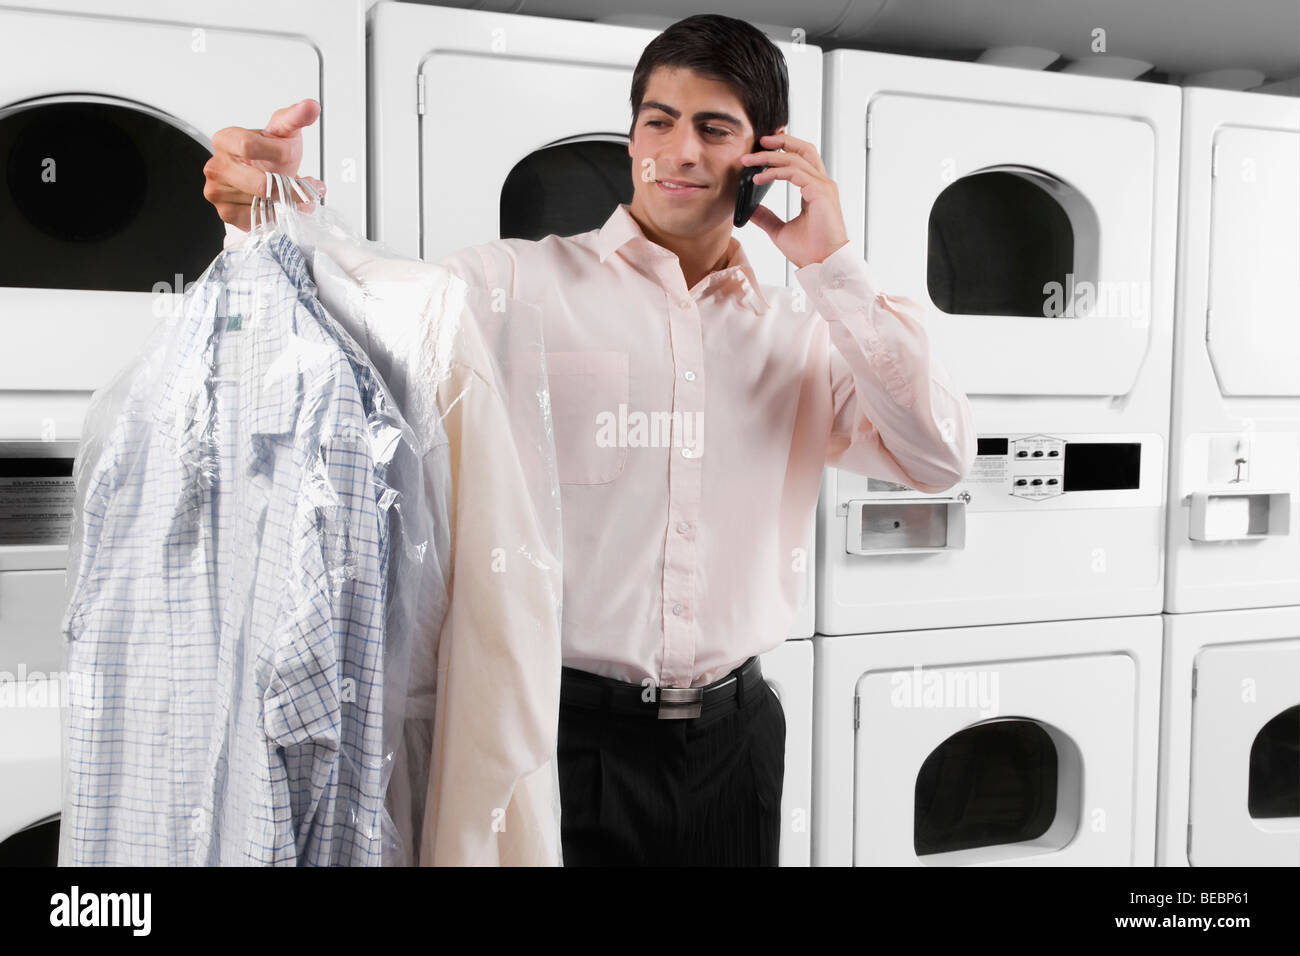 Man talking on a mobile phone and holding shirts Stock Photo